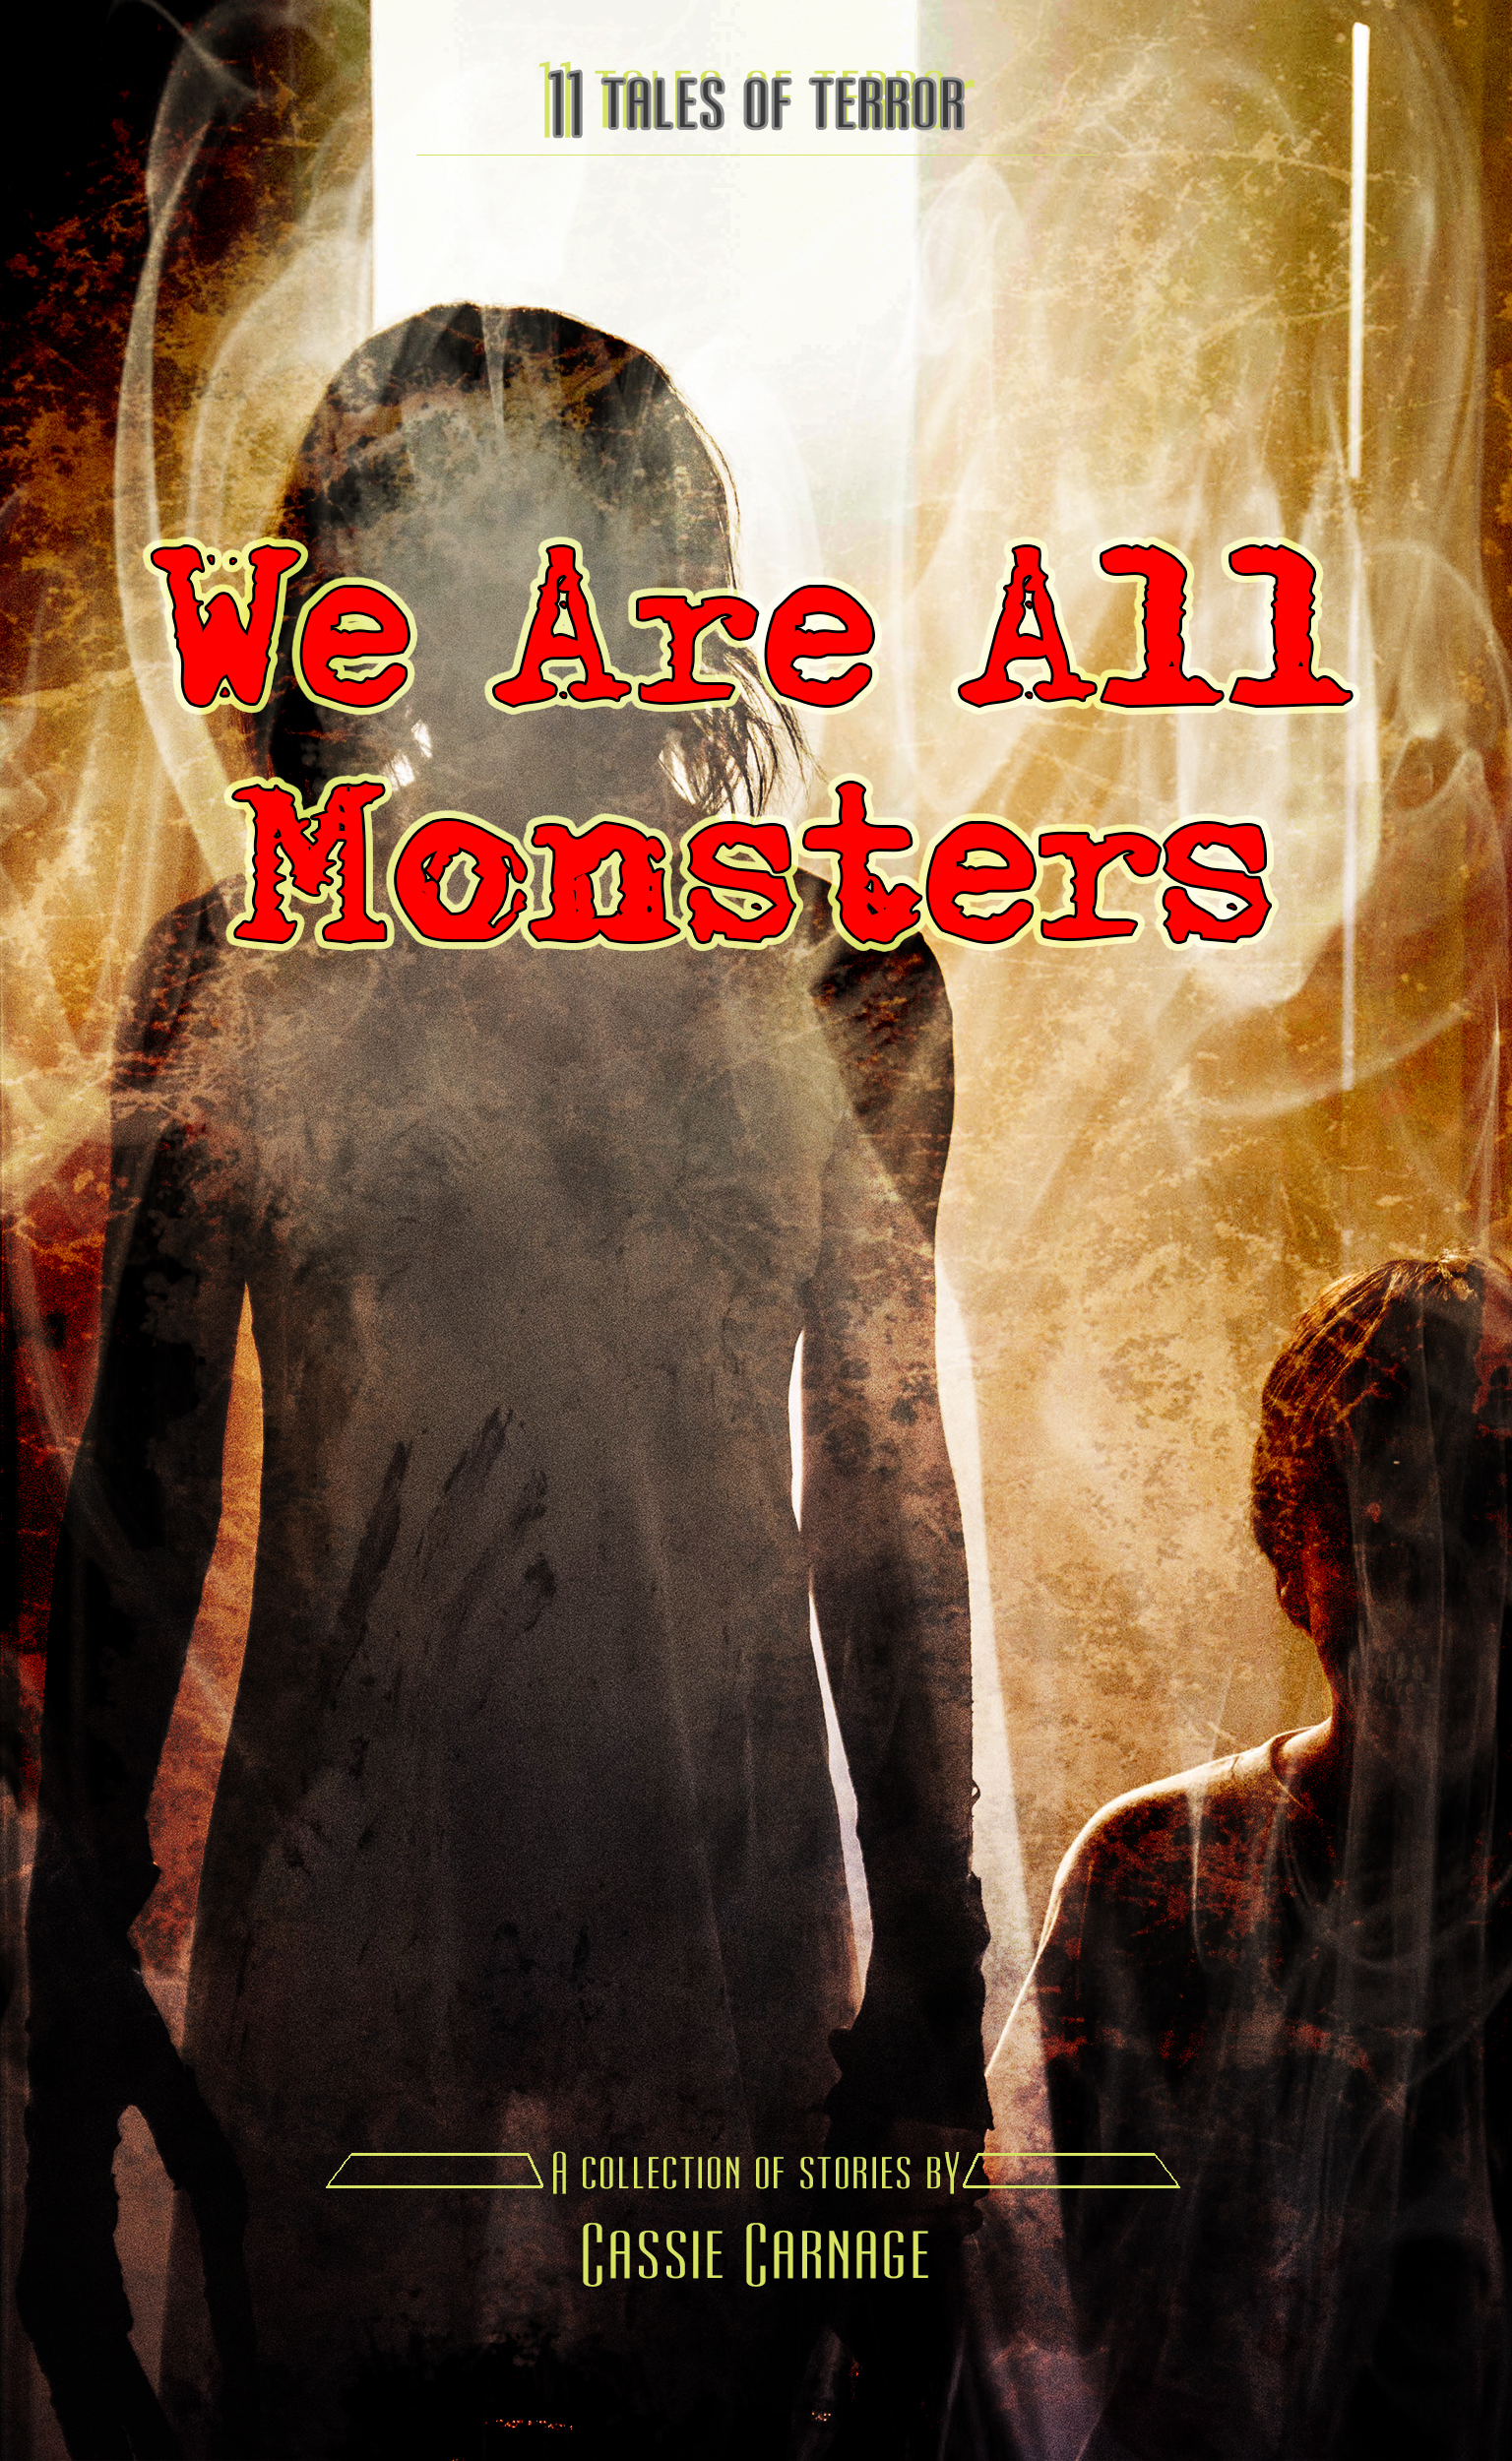 WE ARE ALL MONSTERS is available for free on Kindle right now!